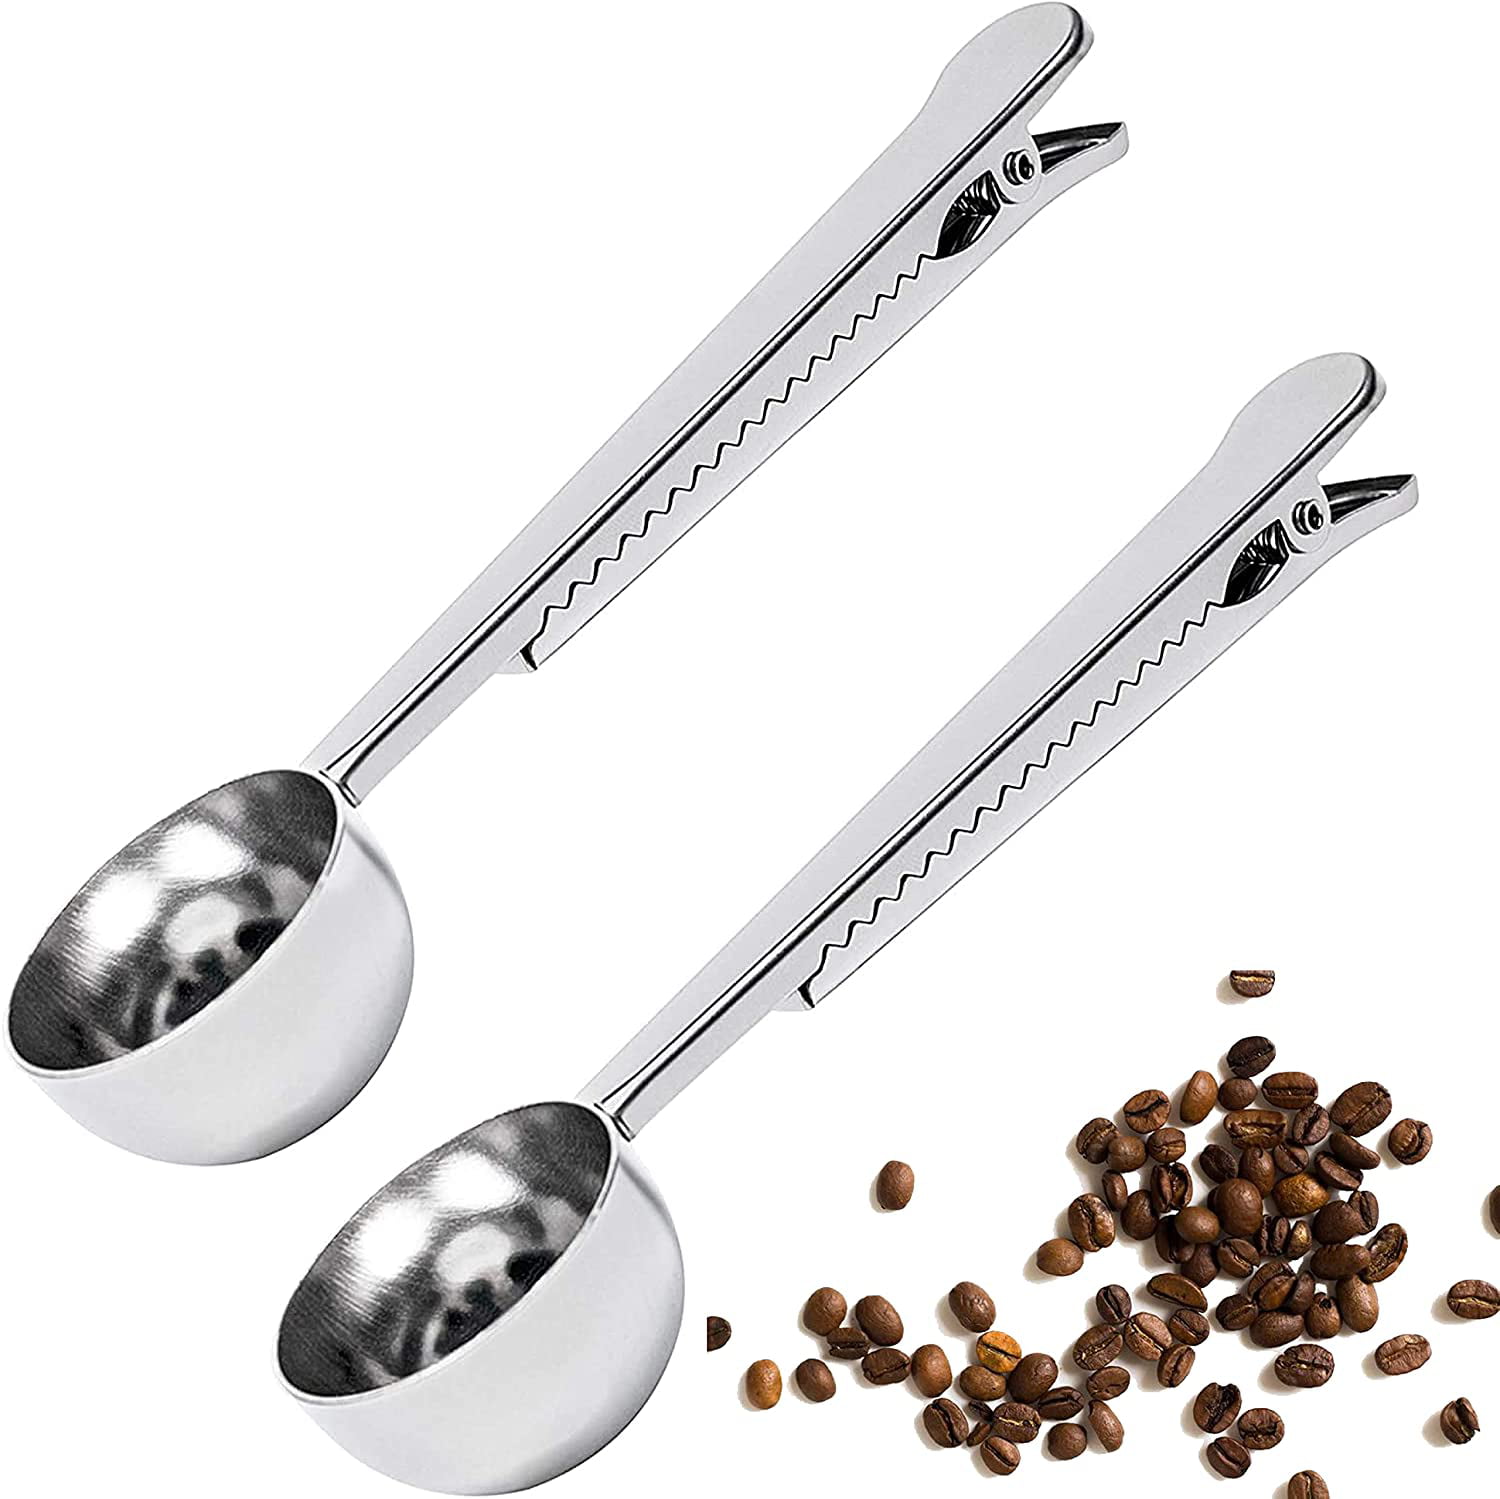 Silver 3 Pack Stainless Steel Coffee Measuring Spoon 2 in 1 Long Handle Tablespoon with Bag Clip for Coffee Tea/Pet Food/Protein Powder Coffee Scoop with Clip 